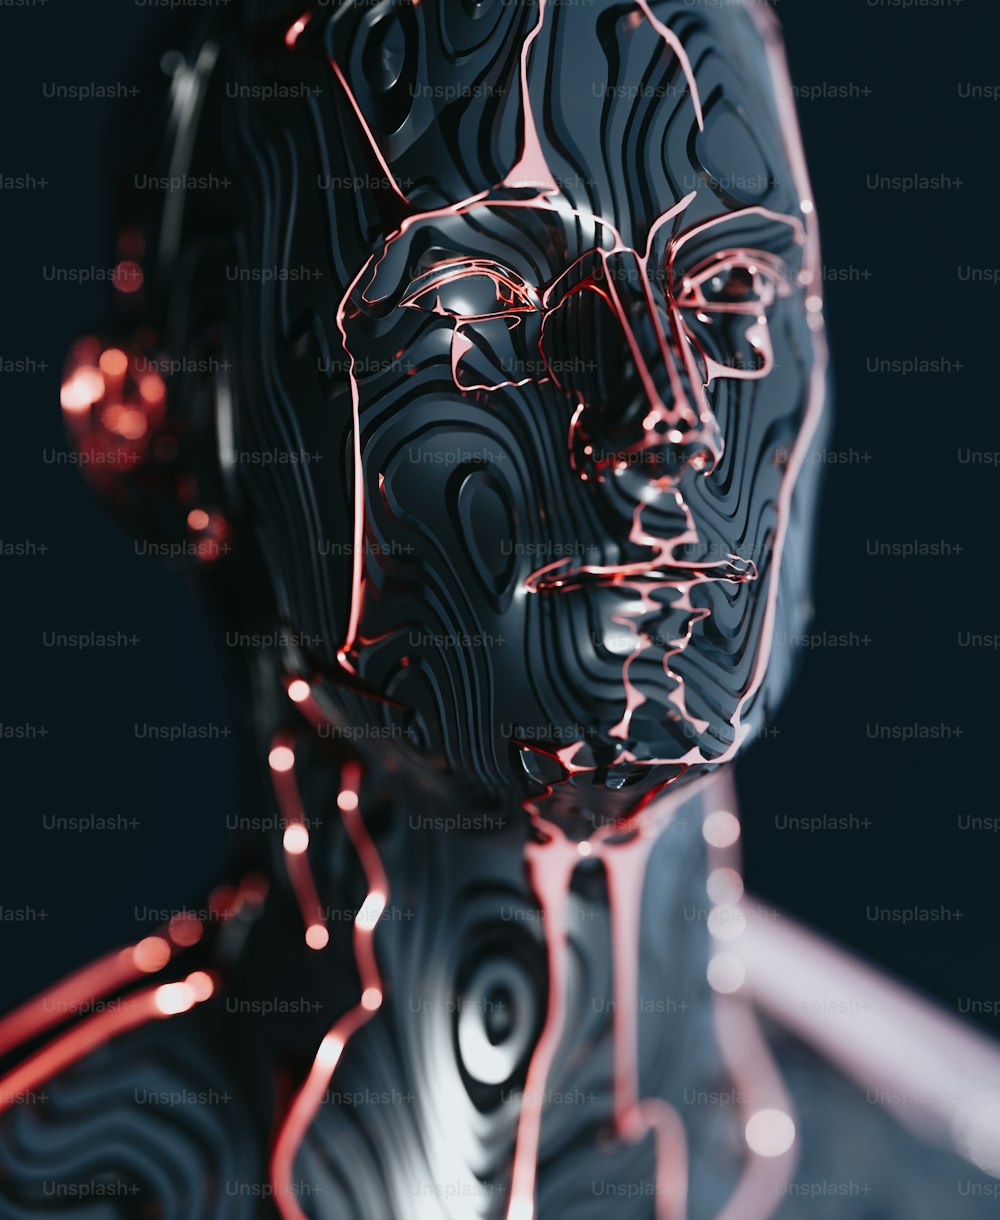 a 3d image of a man's face and body